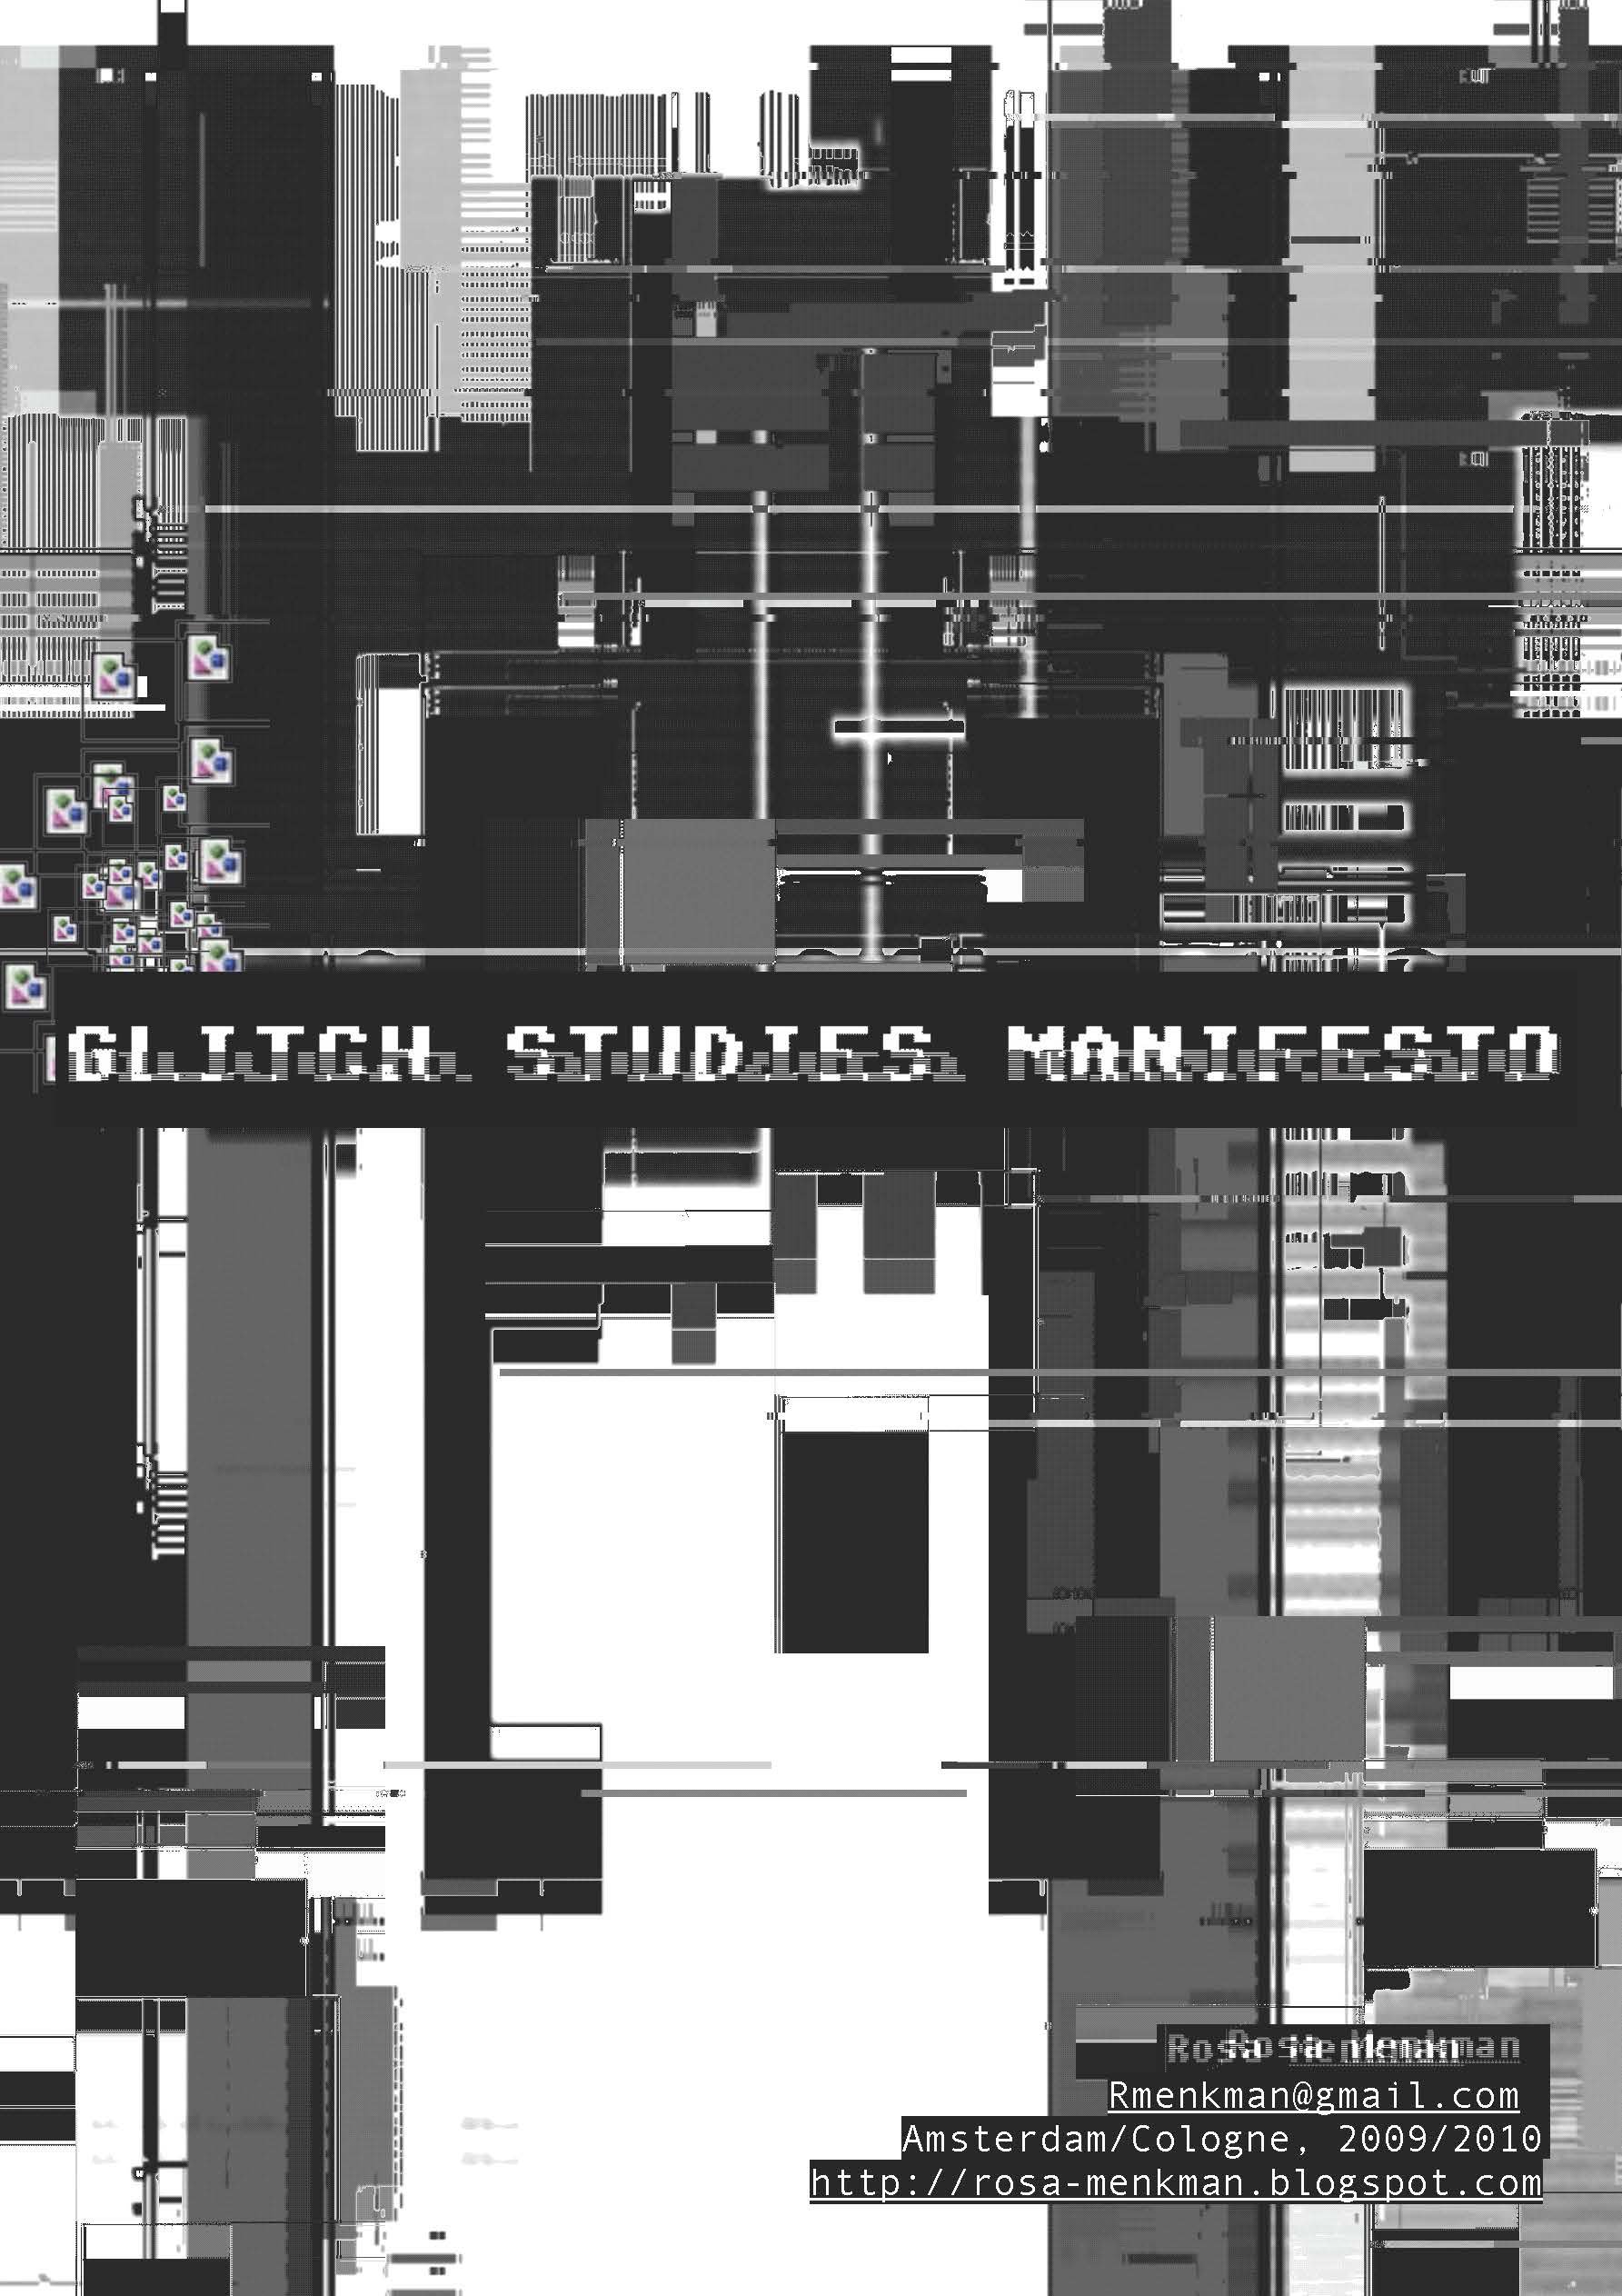 A black, grey, and white glitchy poster with "Glitch Studies Manifesto" is typed in glitchy letters in the center behind a dark grey background. Almost looks like a malfunctioned dystopian city that a computer dreamed of.